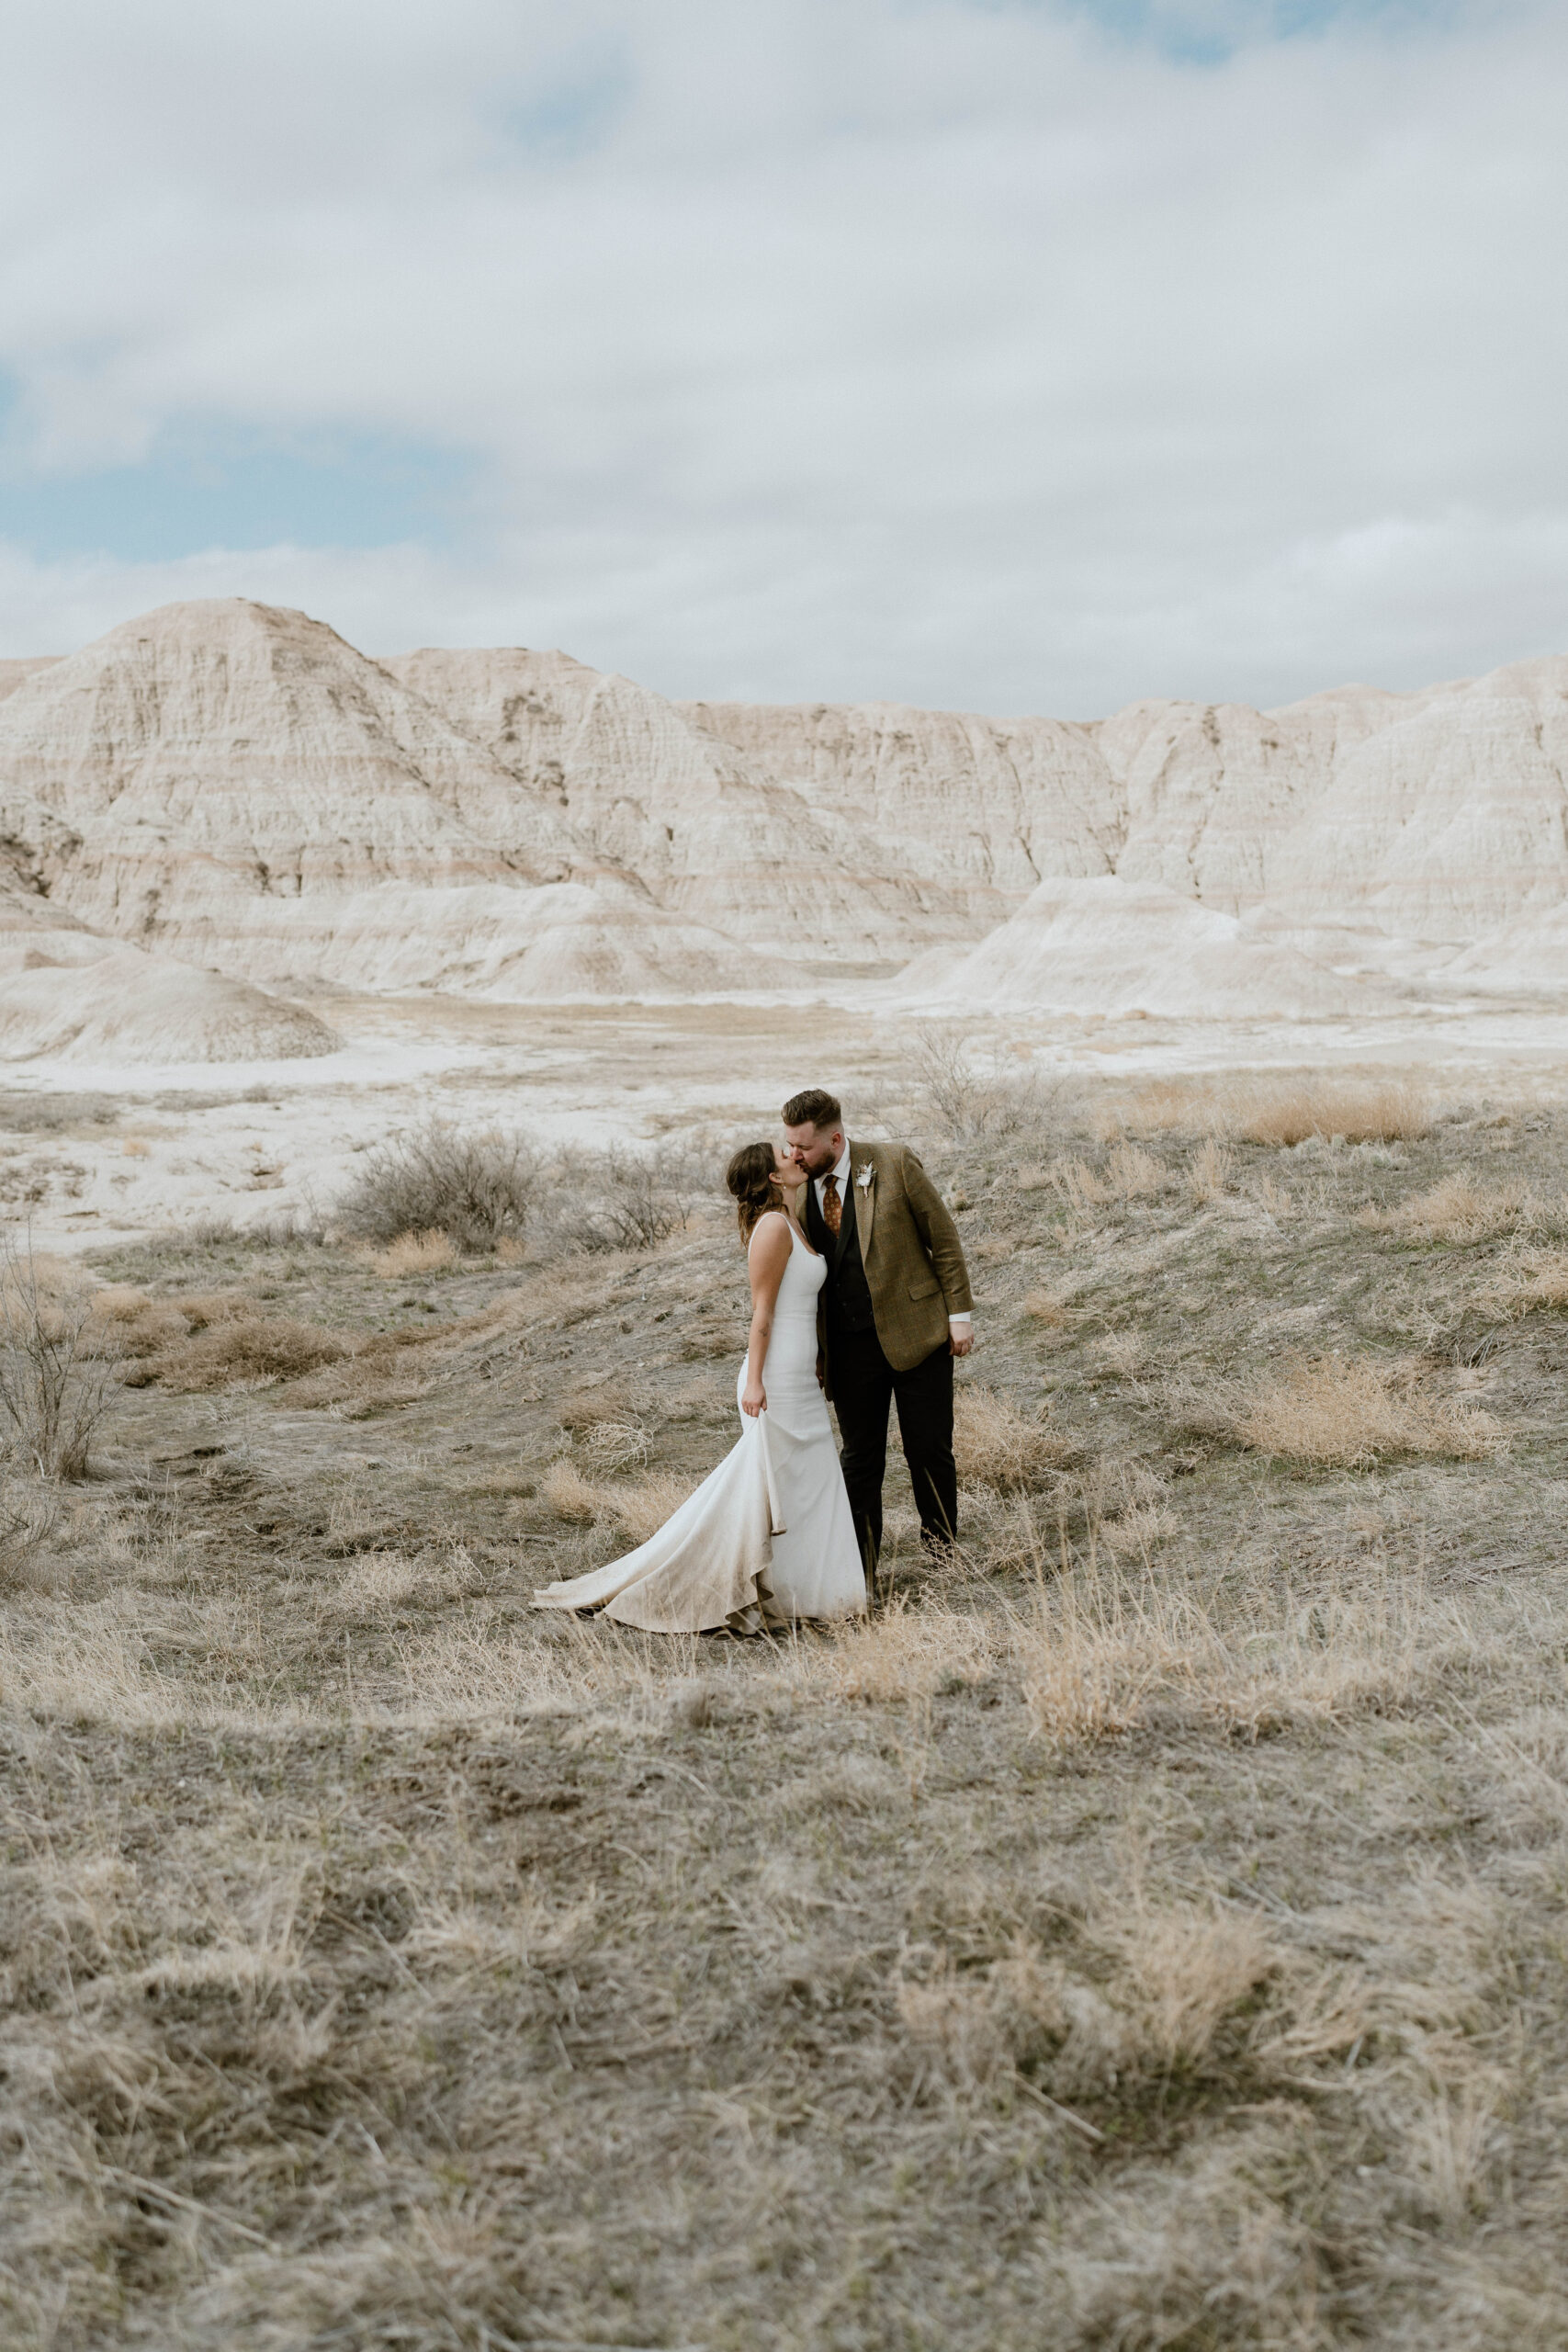 A newly married couple kisses in Badlands National Park